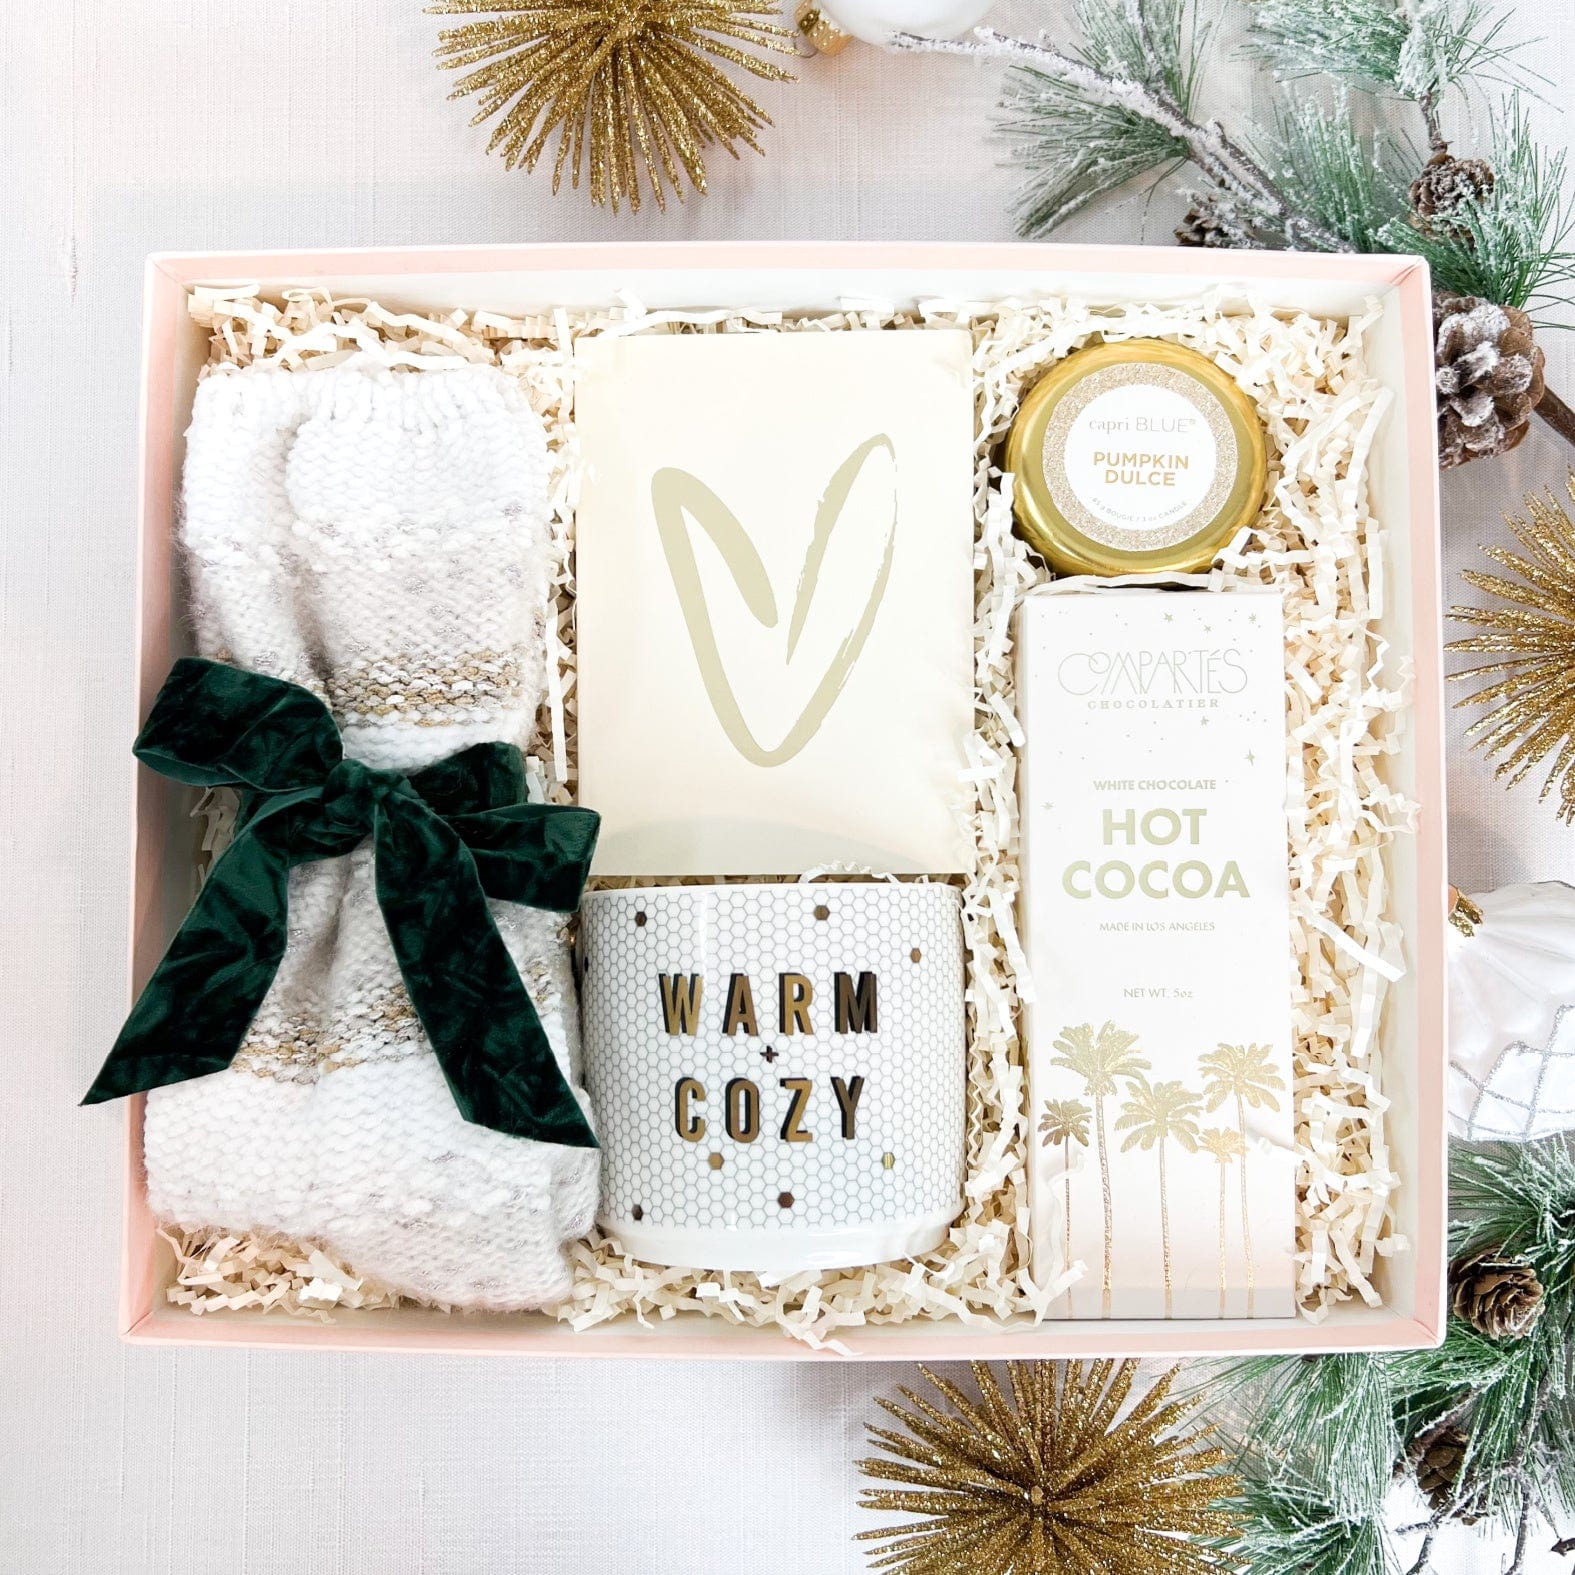 Making Spirits Bright Luxury Christmas Gift Box For Women – Luxe & Bloom